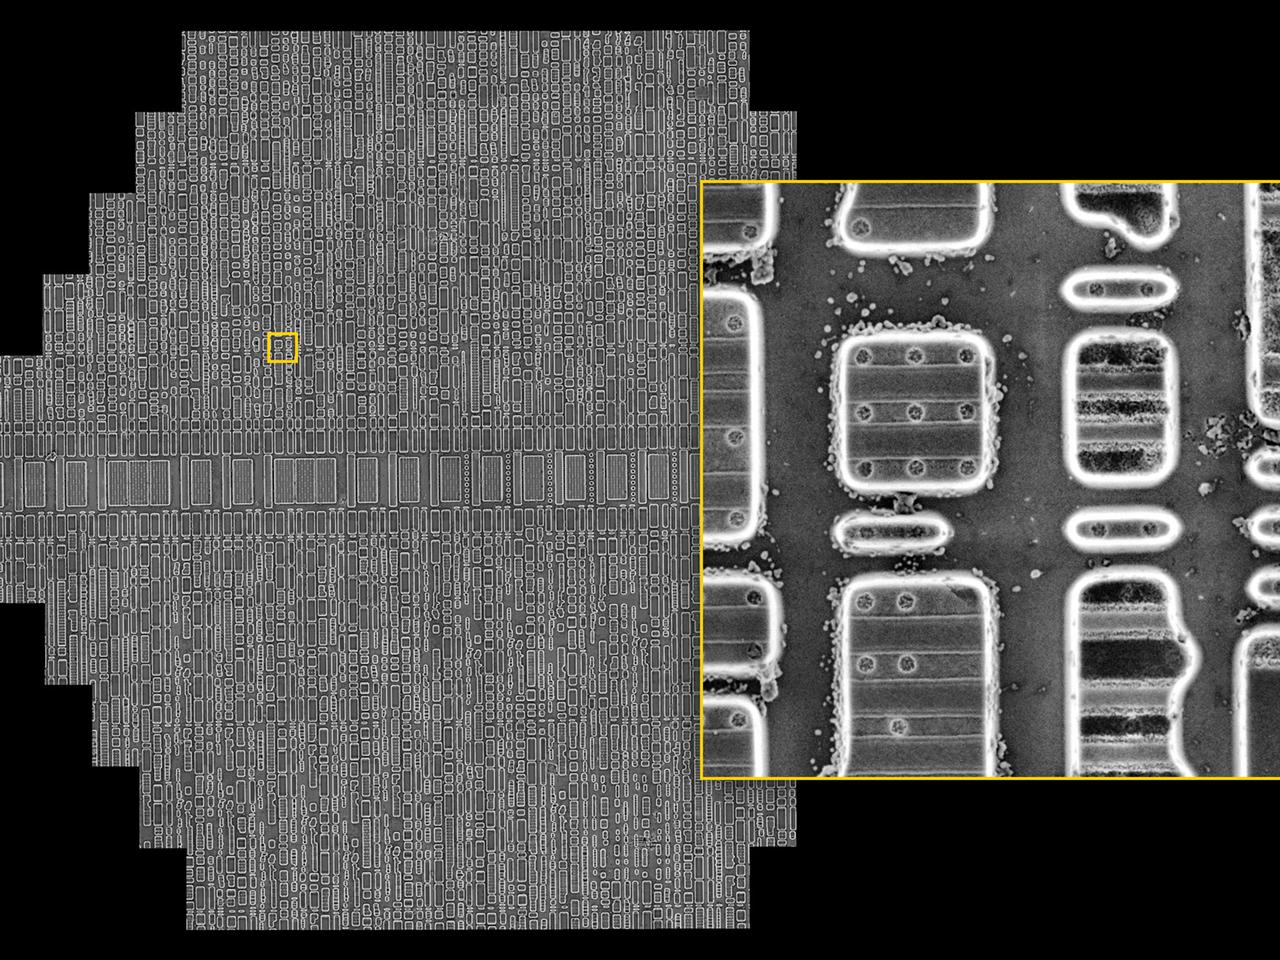 65 nm technology node graphics processor integrated circuit, stripped to its silicon substrate with HF acid etching.